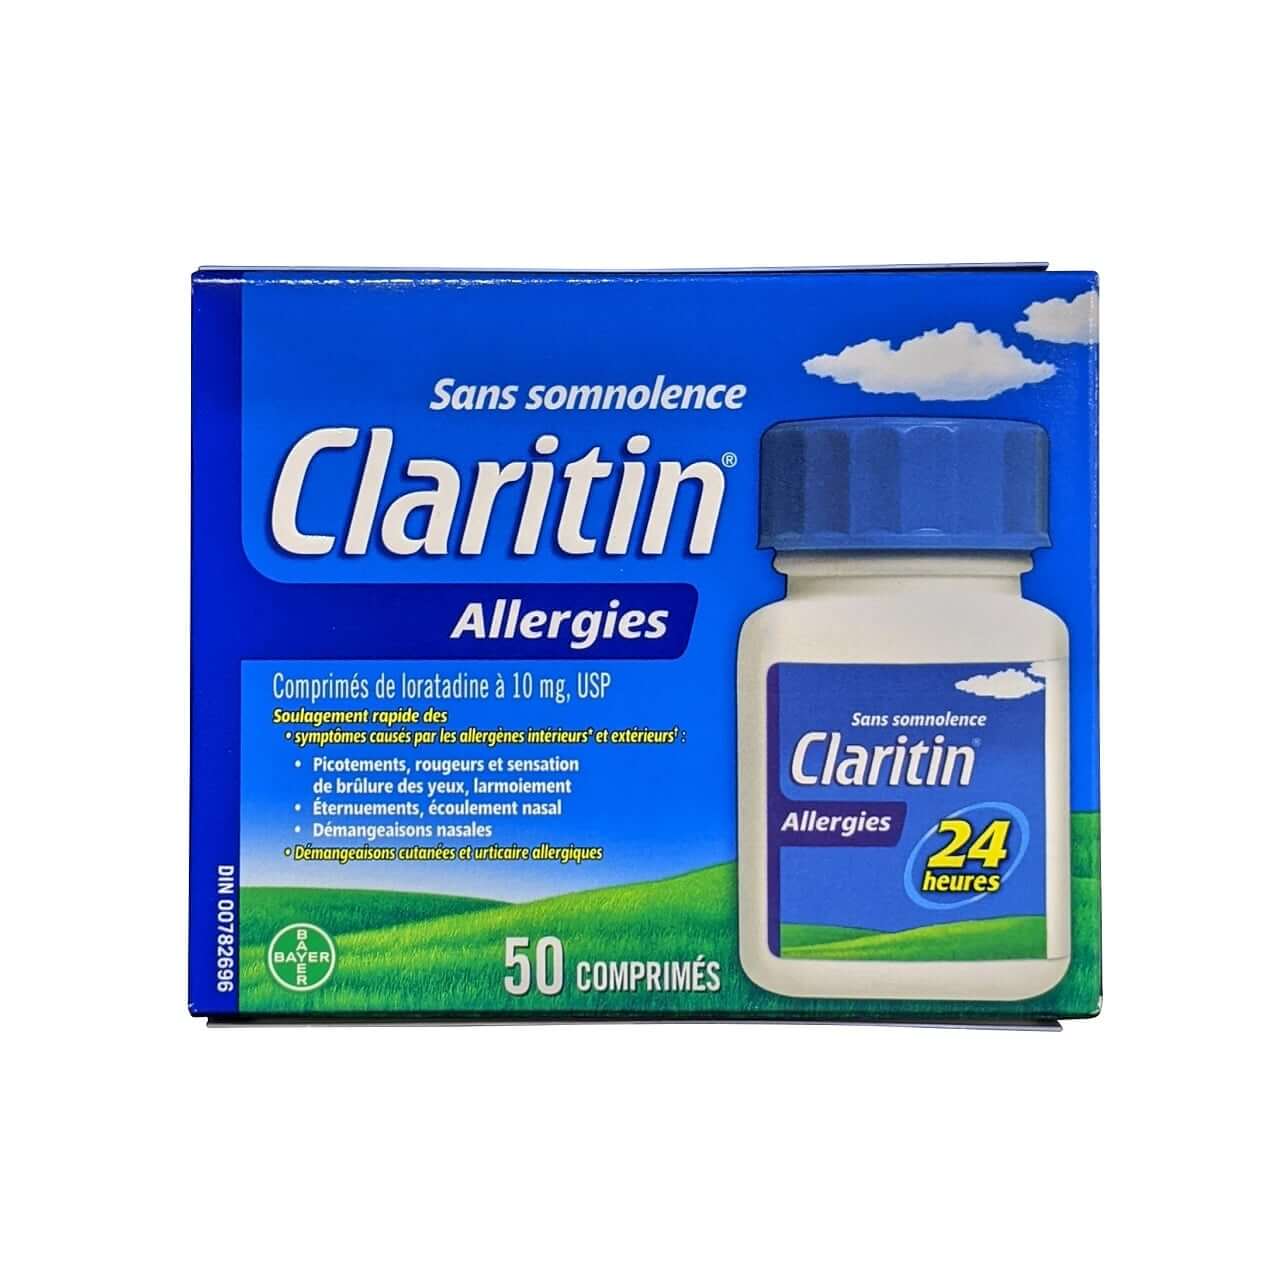 Product label for Claritin Non-Drowsy Loratadine 10mg (50 tablets) in French